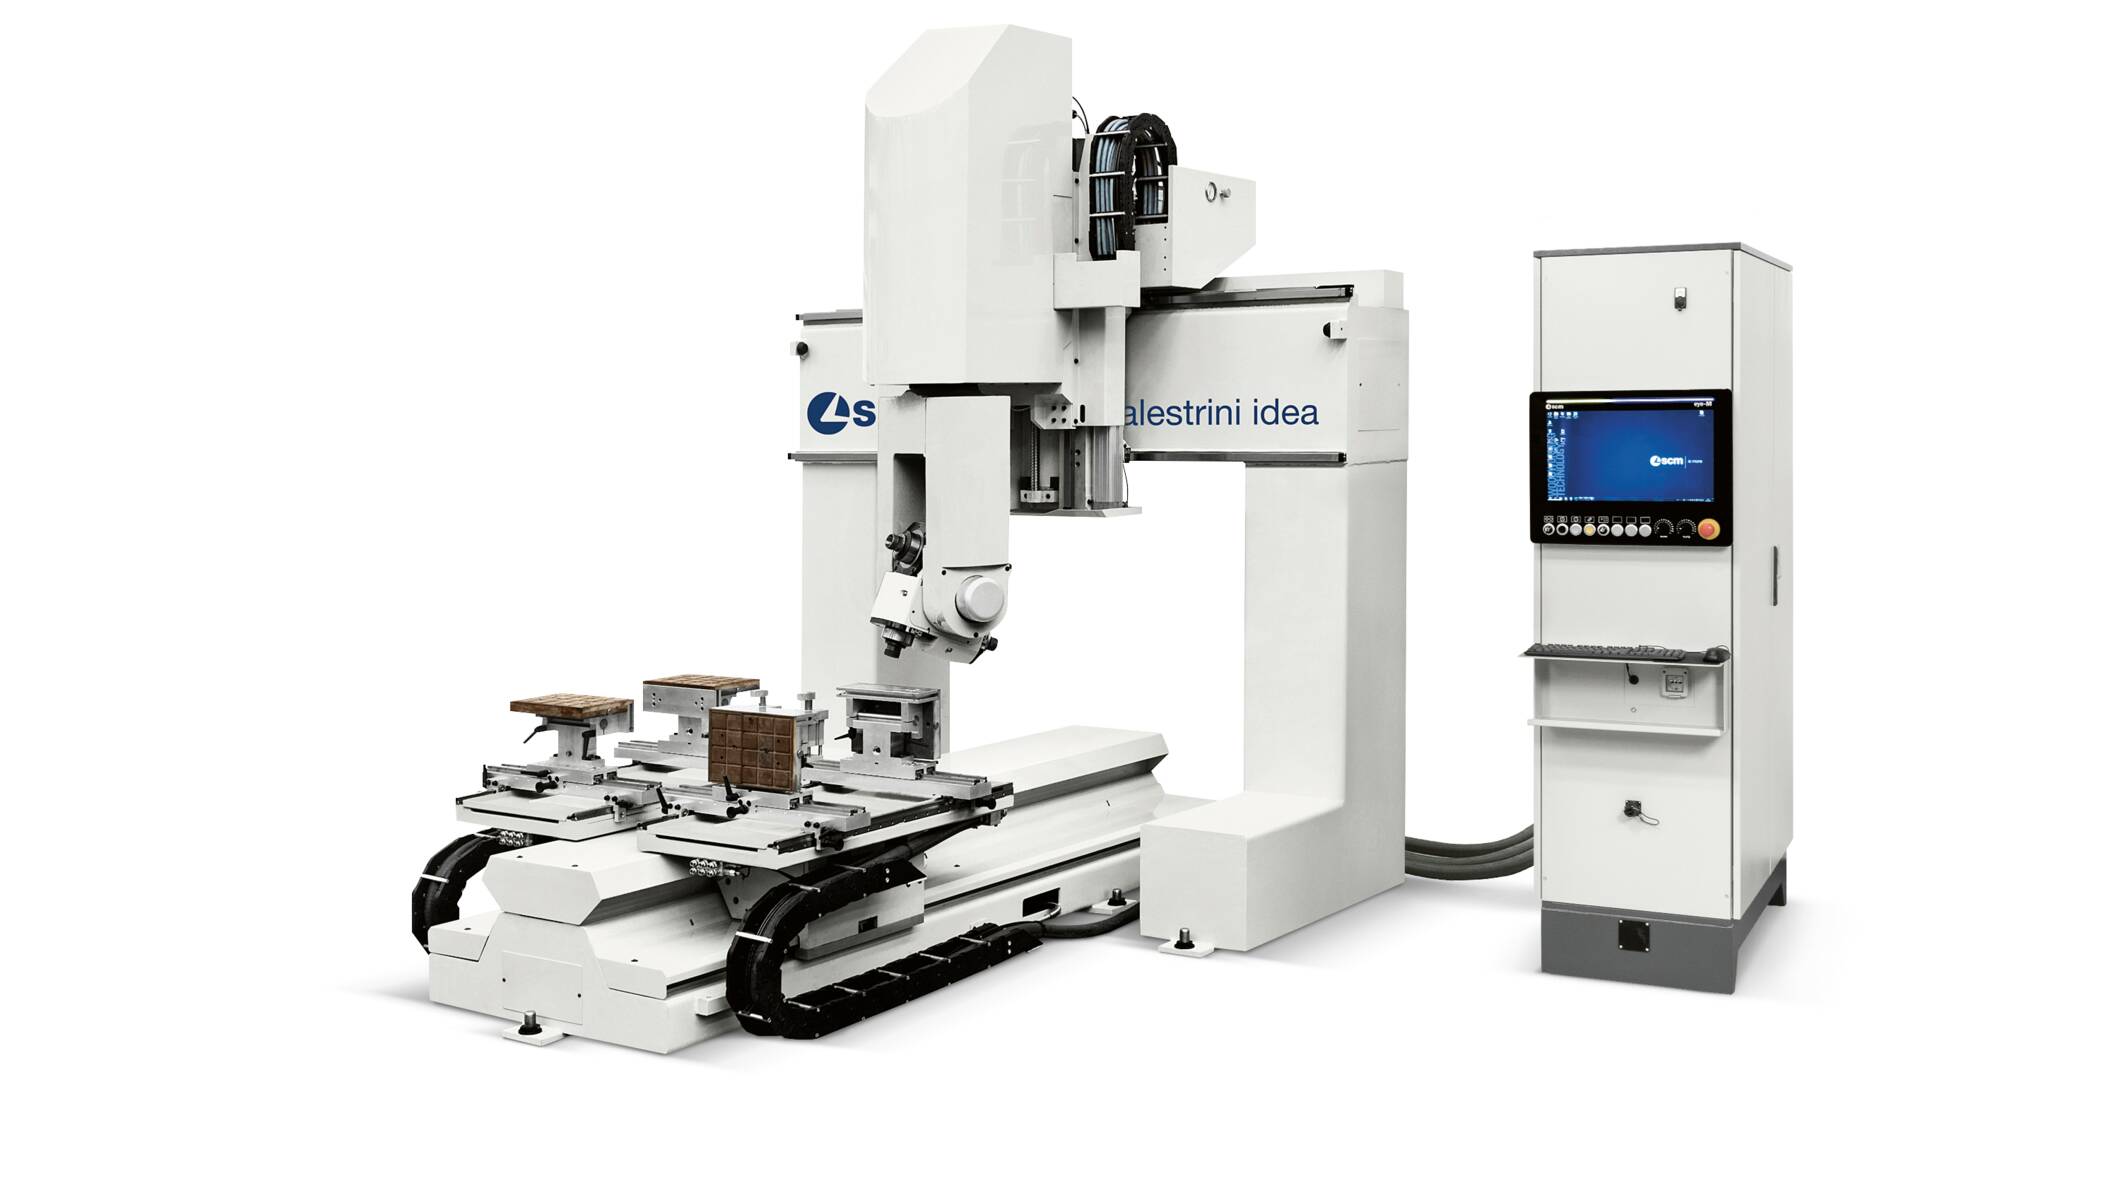 CNC - Centres d'Usinage - CNC Machining Centres for chair and desk components  - balestrini idea